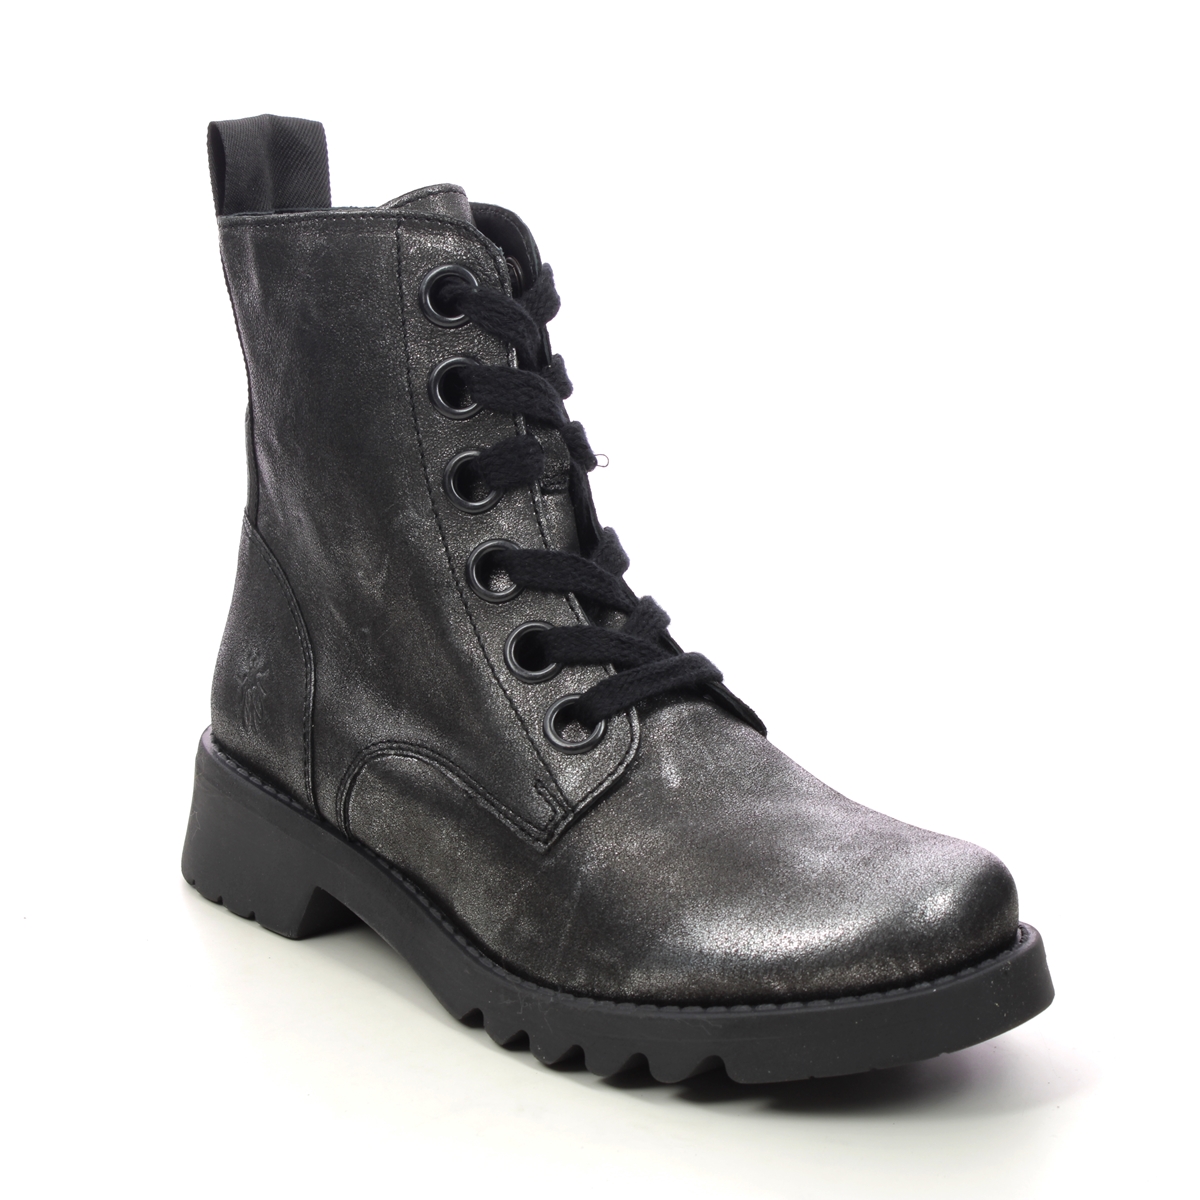 Fly London Ragi  Ronin Silver Glitz Womens Lace Up Boots P144539-035 in a Plain Leather in Size 37